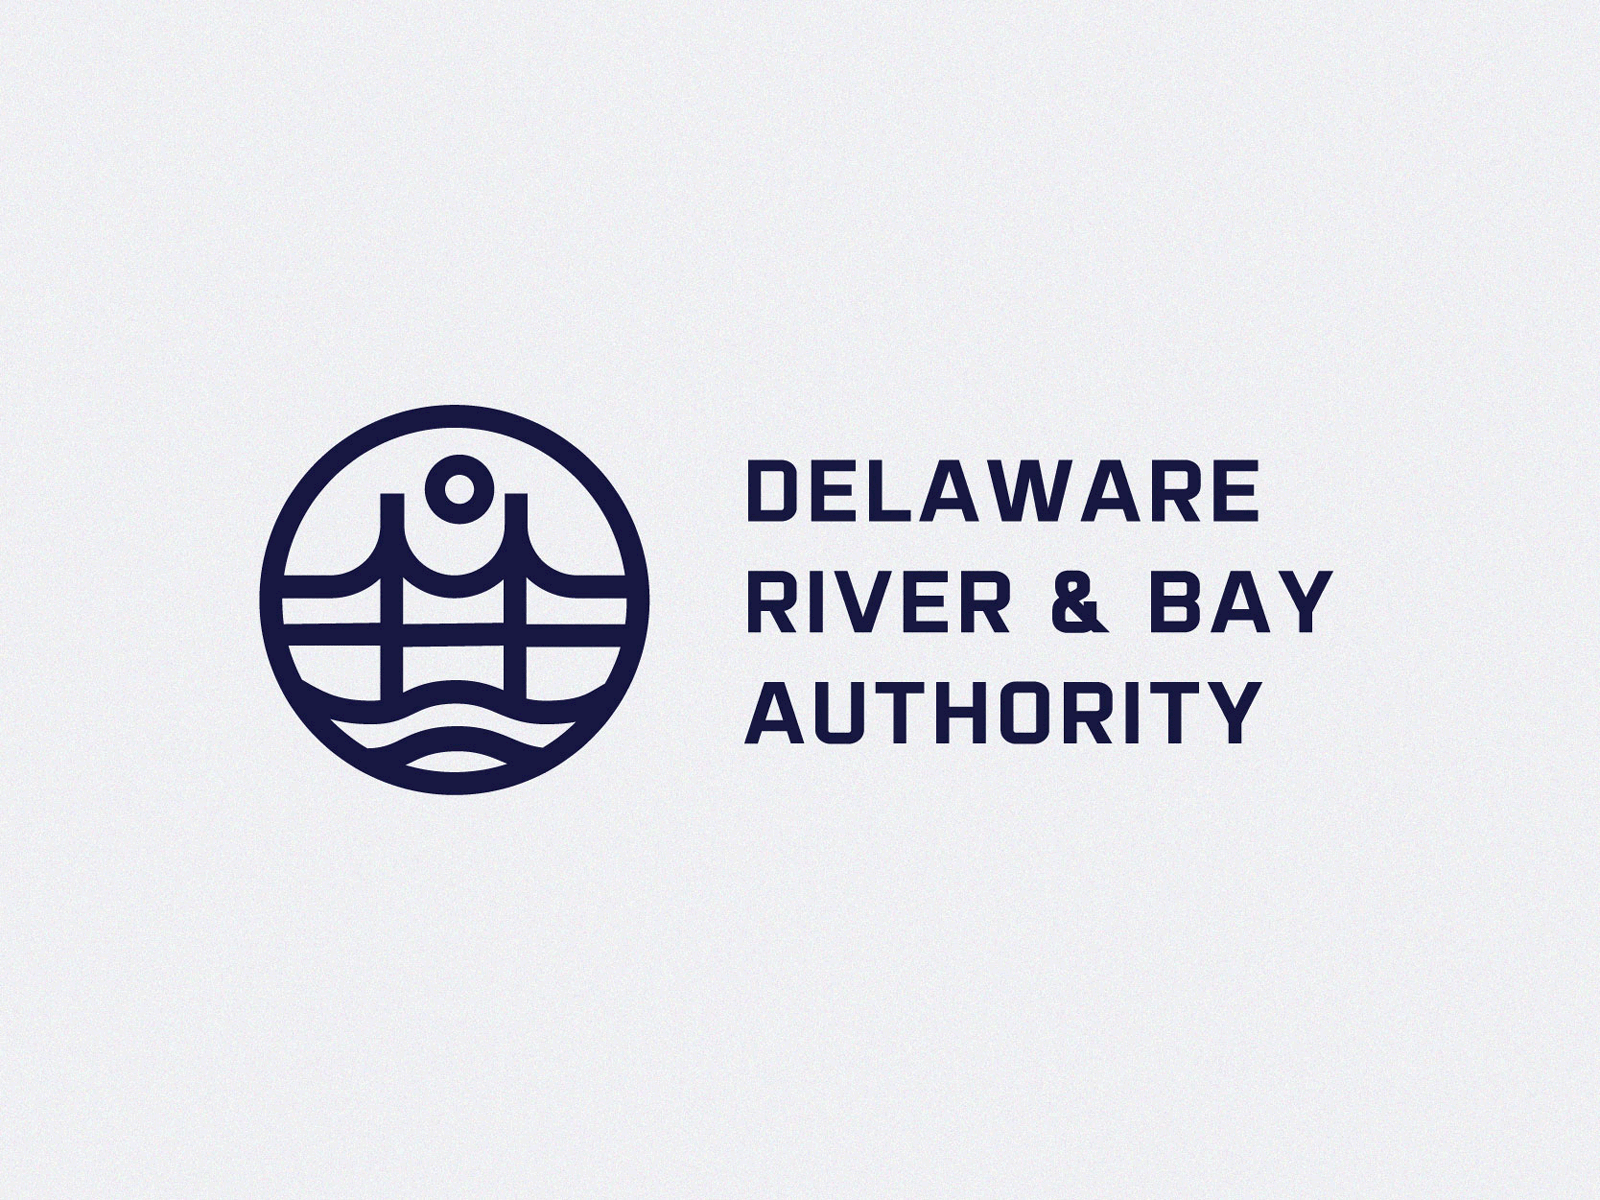 Delaware River & Bay Authority